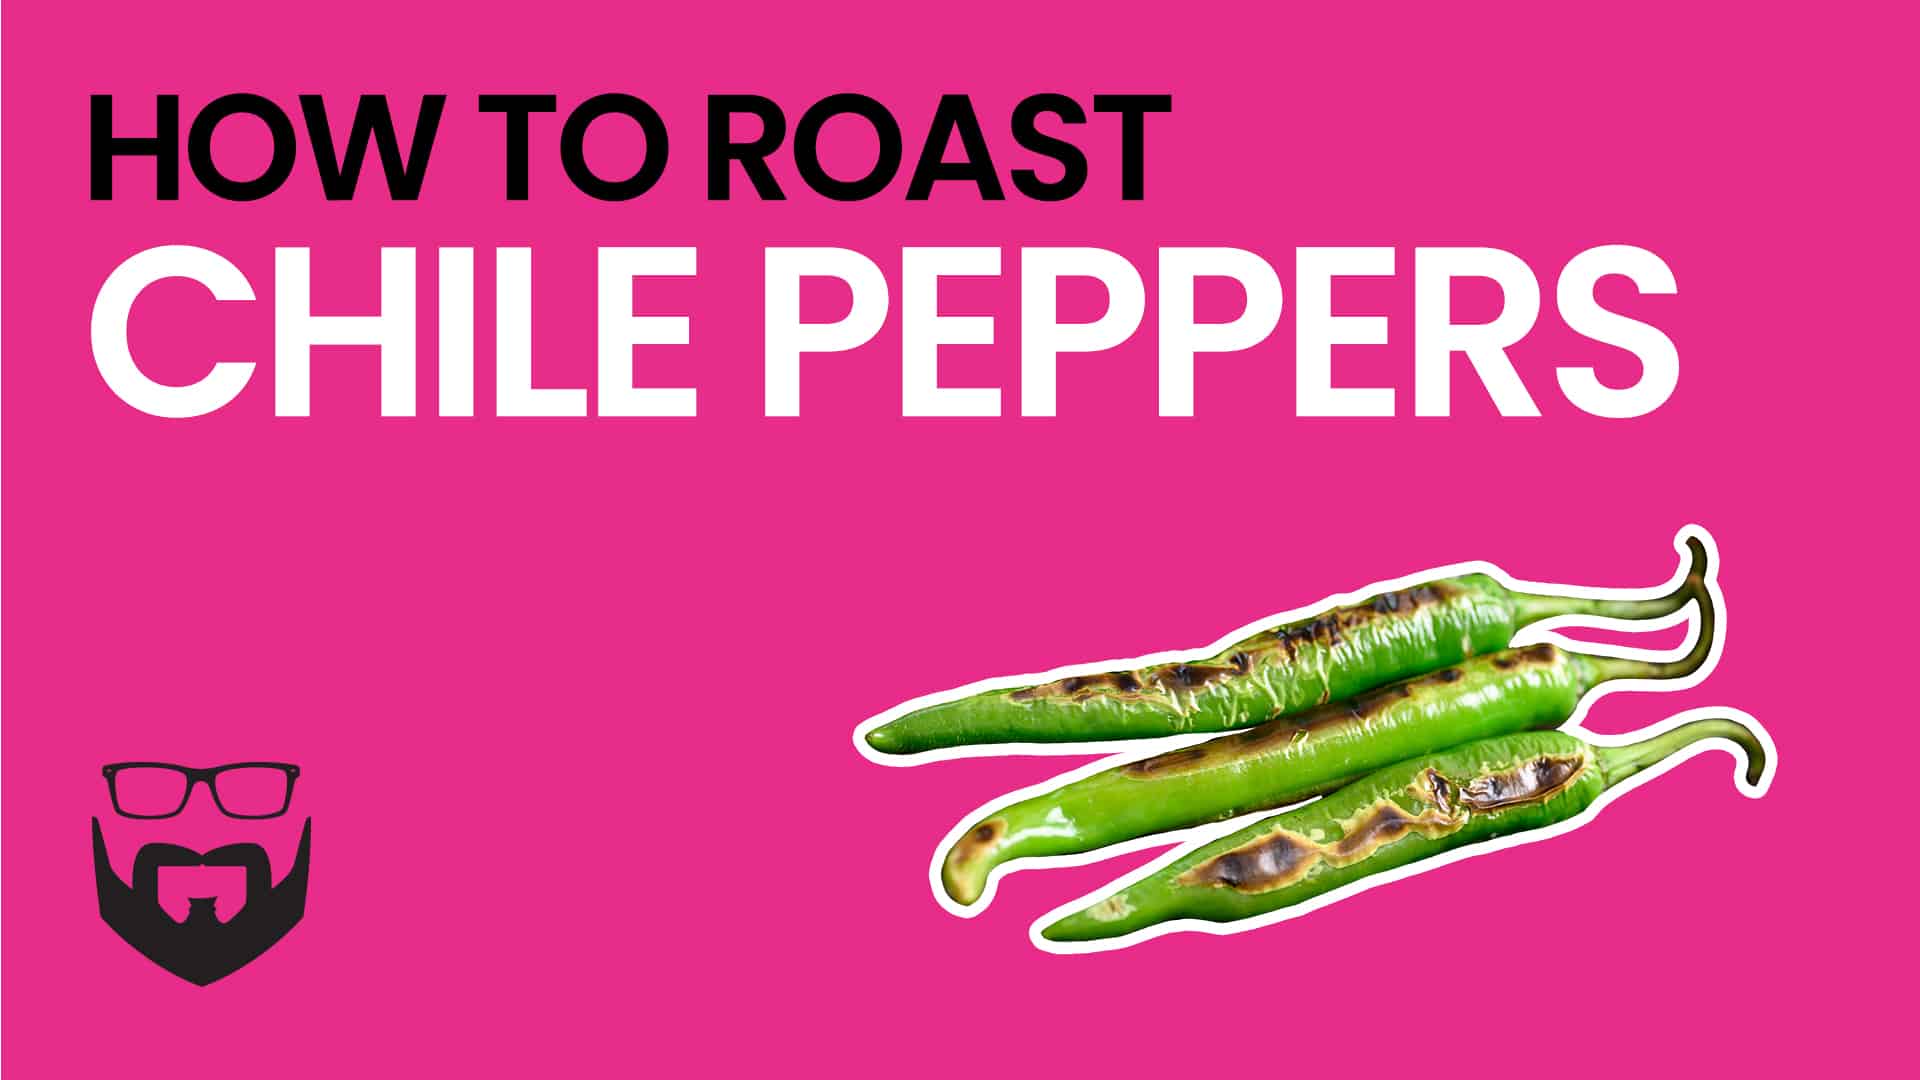 How to Roast Chile Peppers Video - Pink